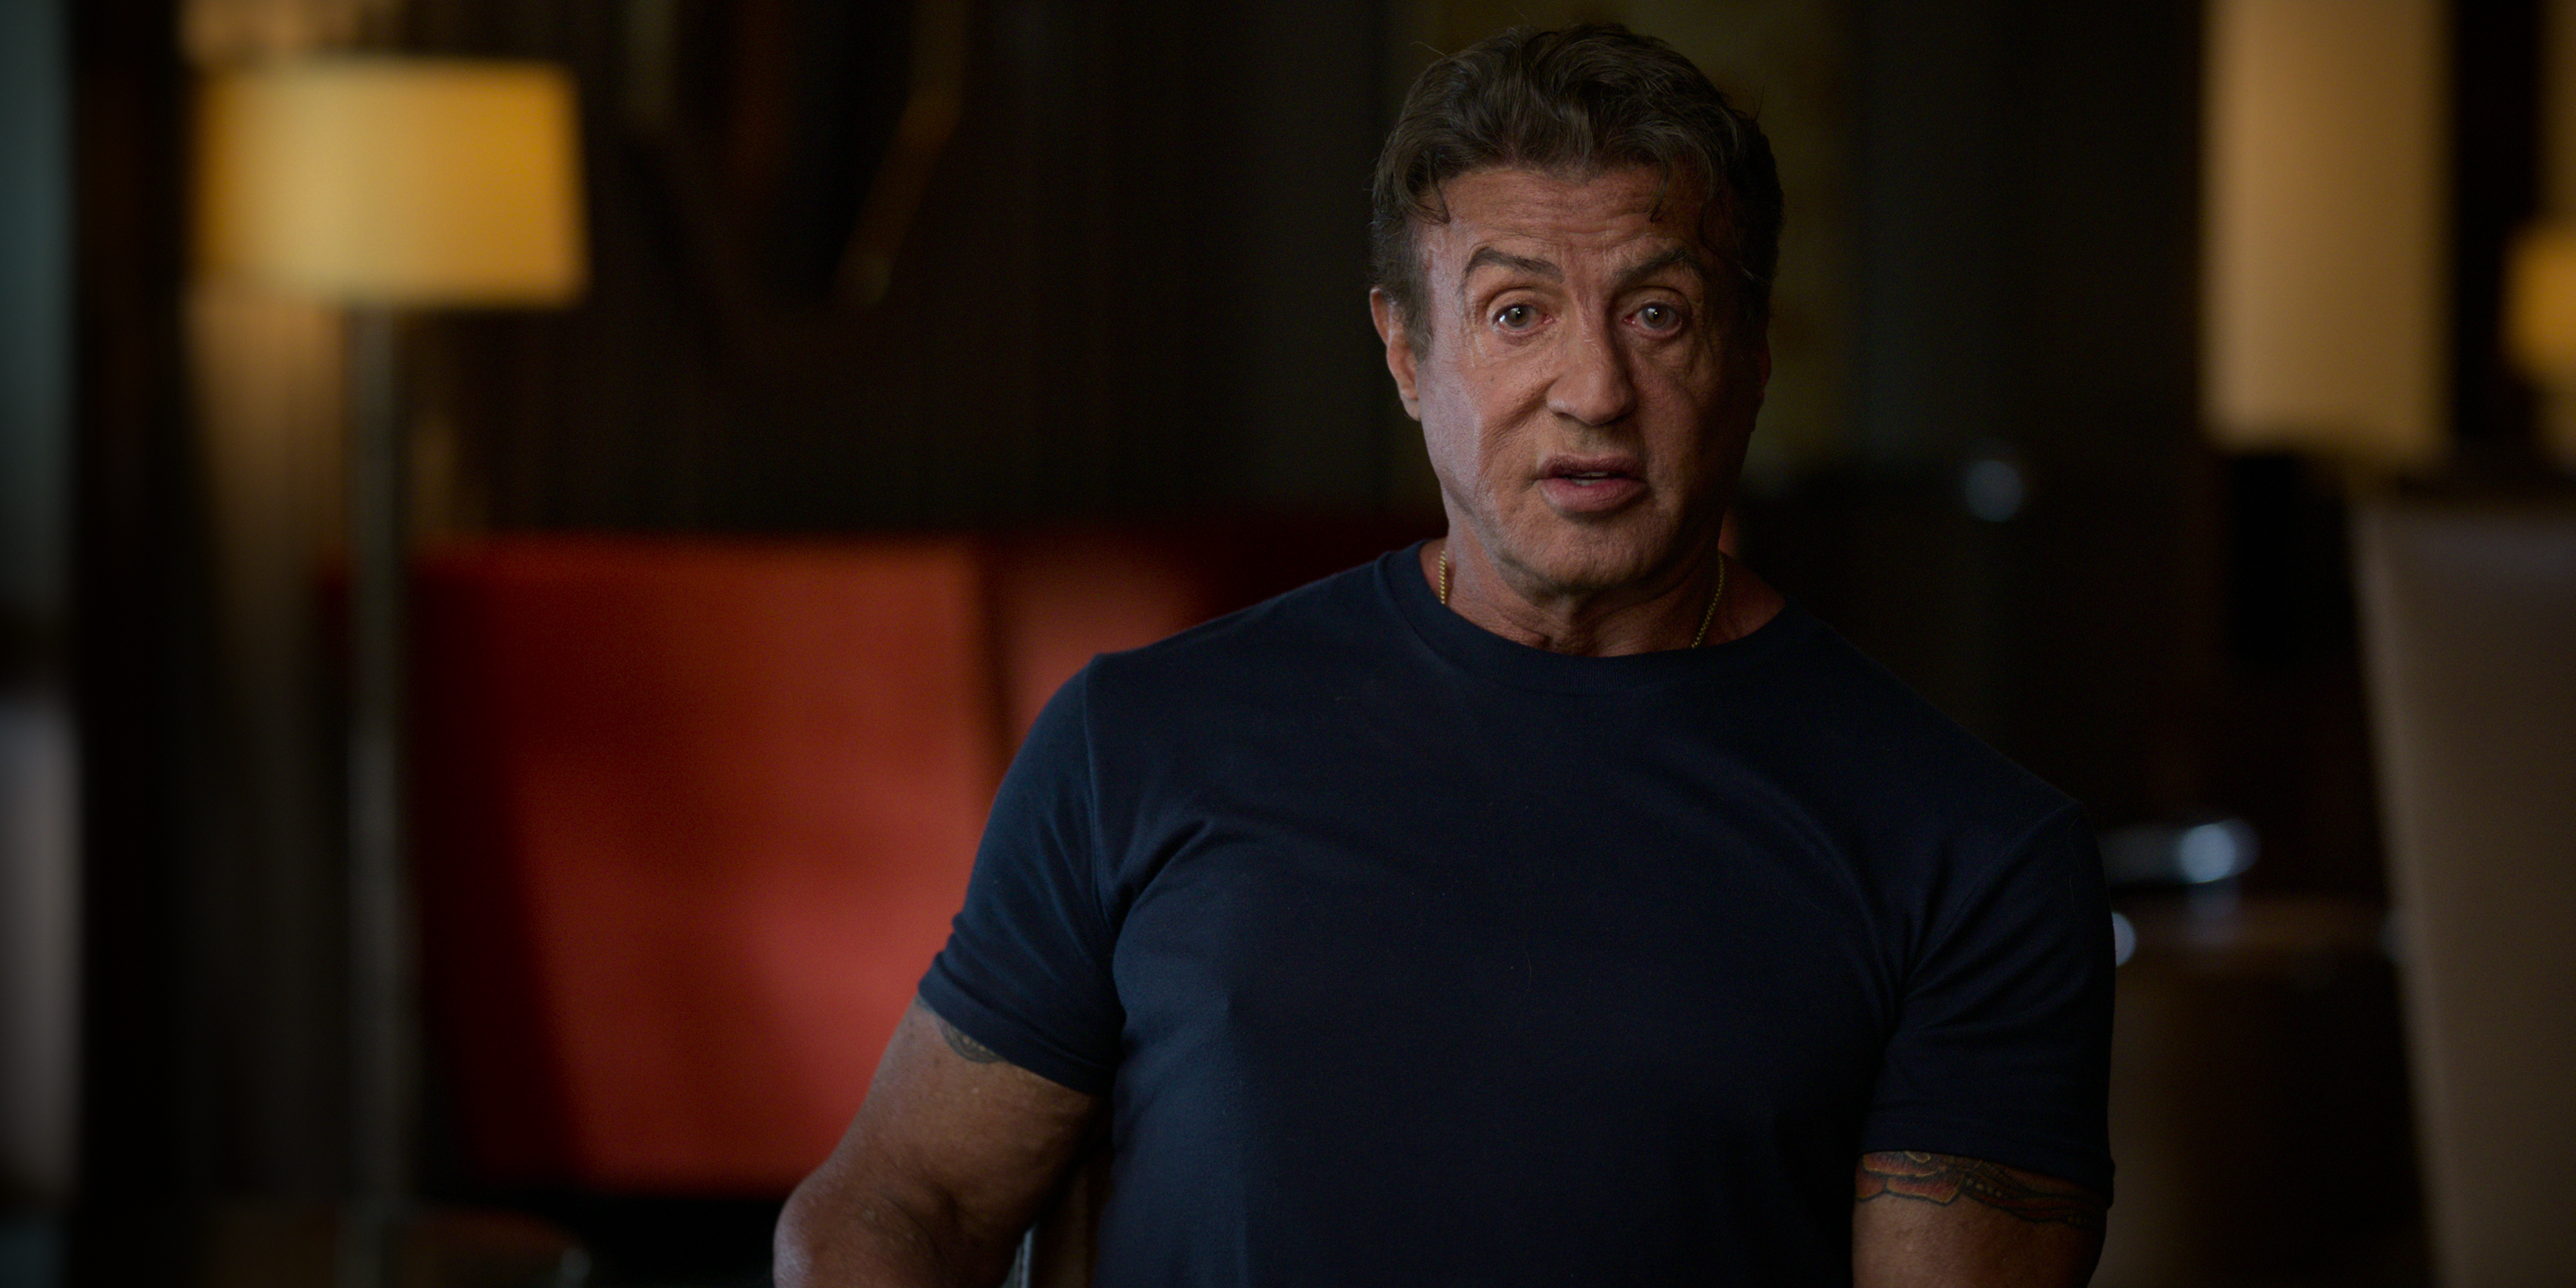 Sylvester Stallone speaks about his rivalry with Arnold Schwarzenegger. Image: Netflix / Supplied